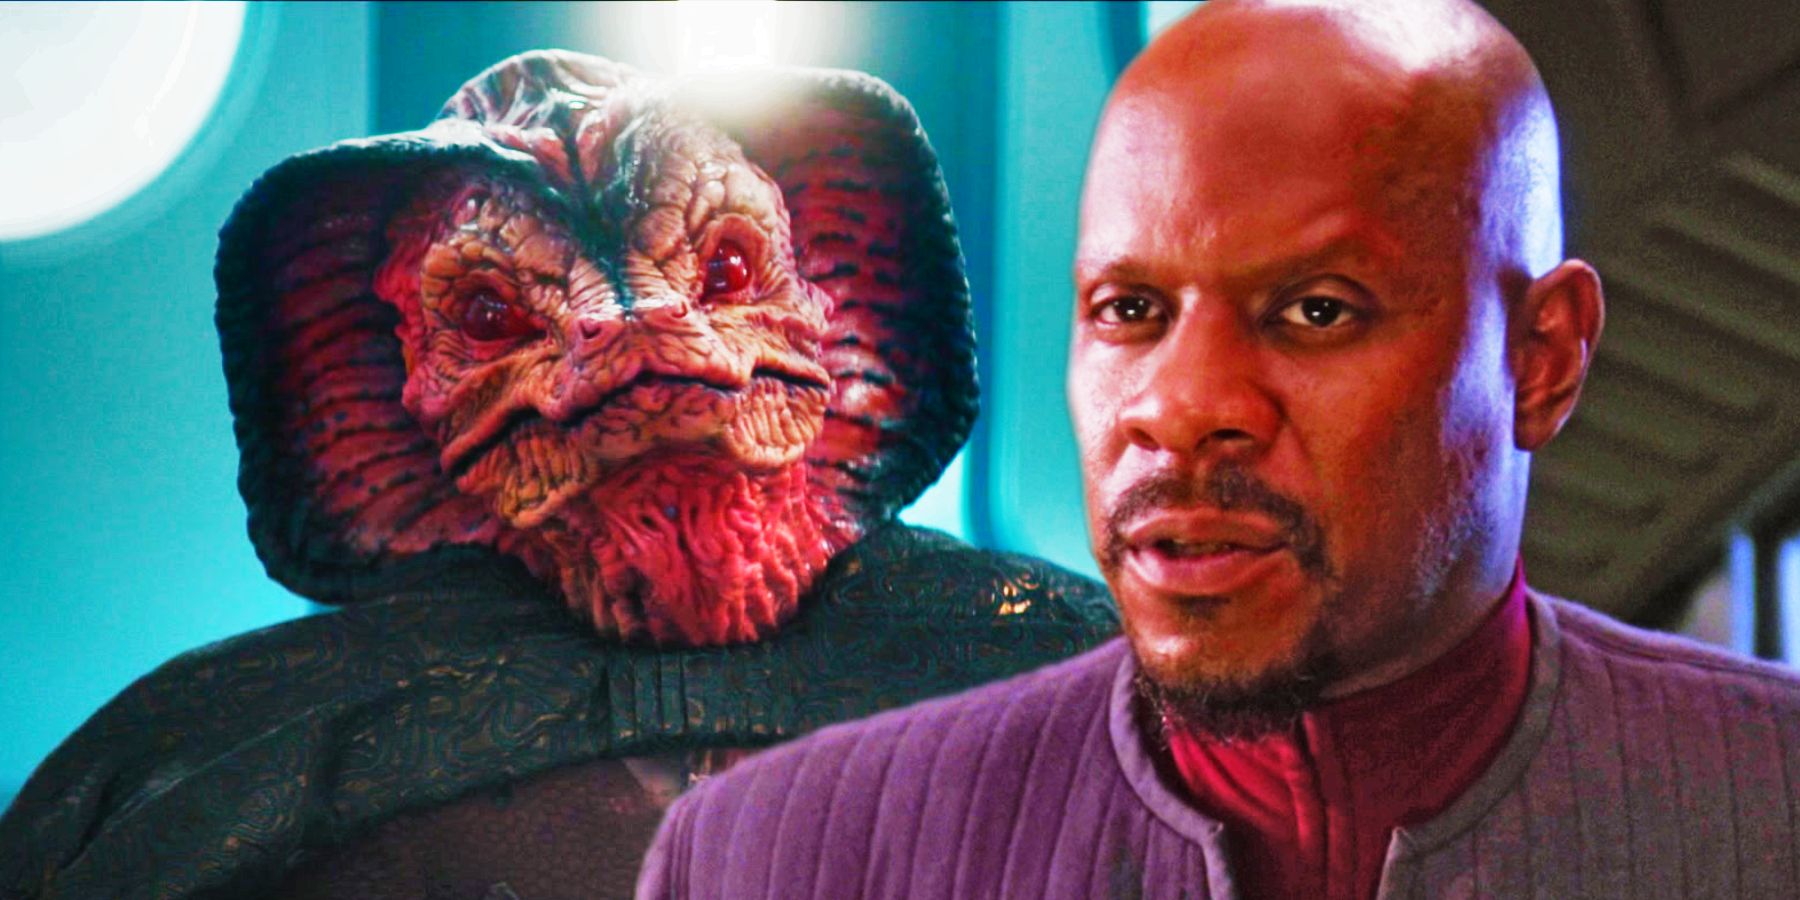 A reptile-like alien in robes and Captain Sisko in his grey DS9 uniform